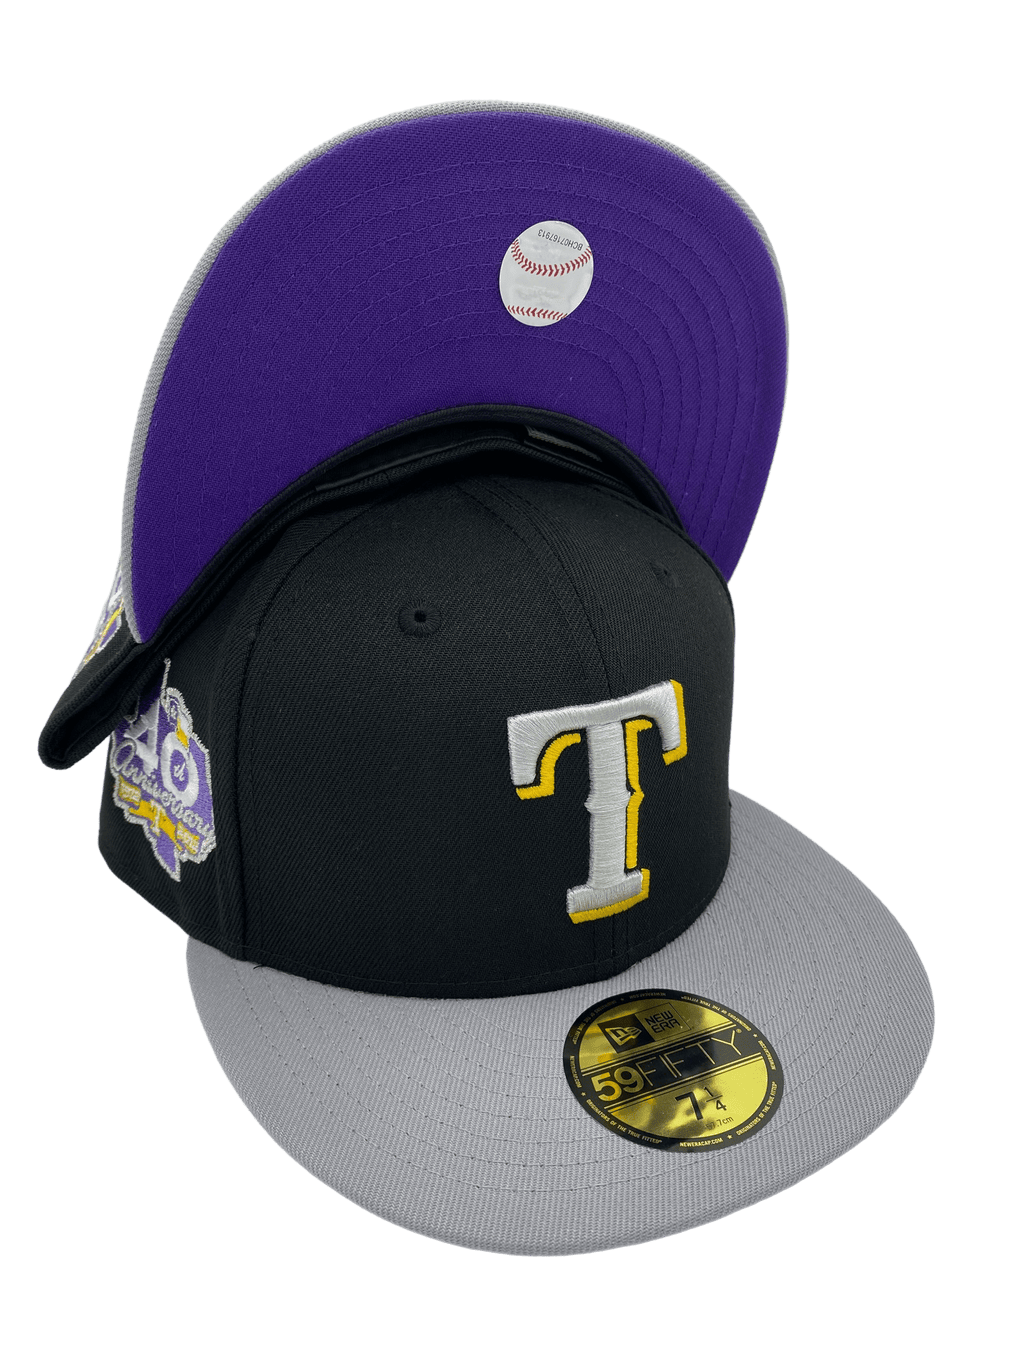 Texas Rangers Fitted Hats  59FIFTY Texas Rangers Fitted Baseball Caps